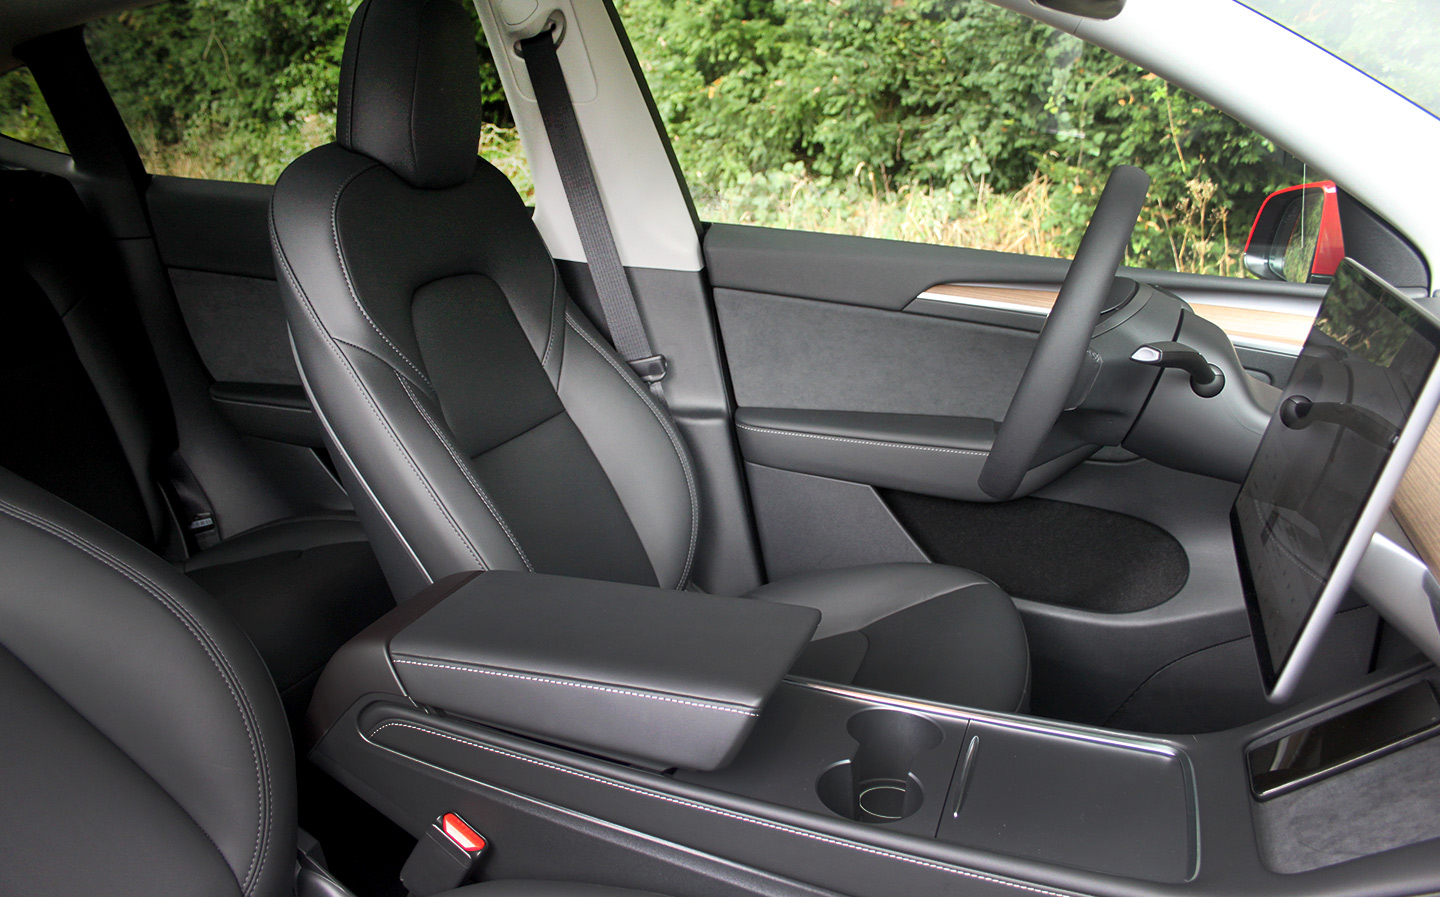 Interior storage and luggage space - Tesla Model Y 2022 review